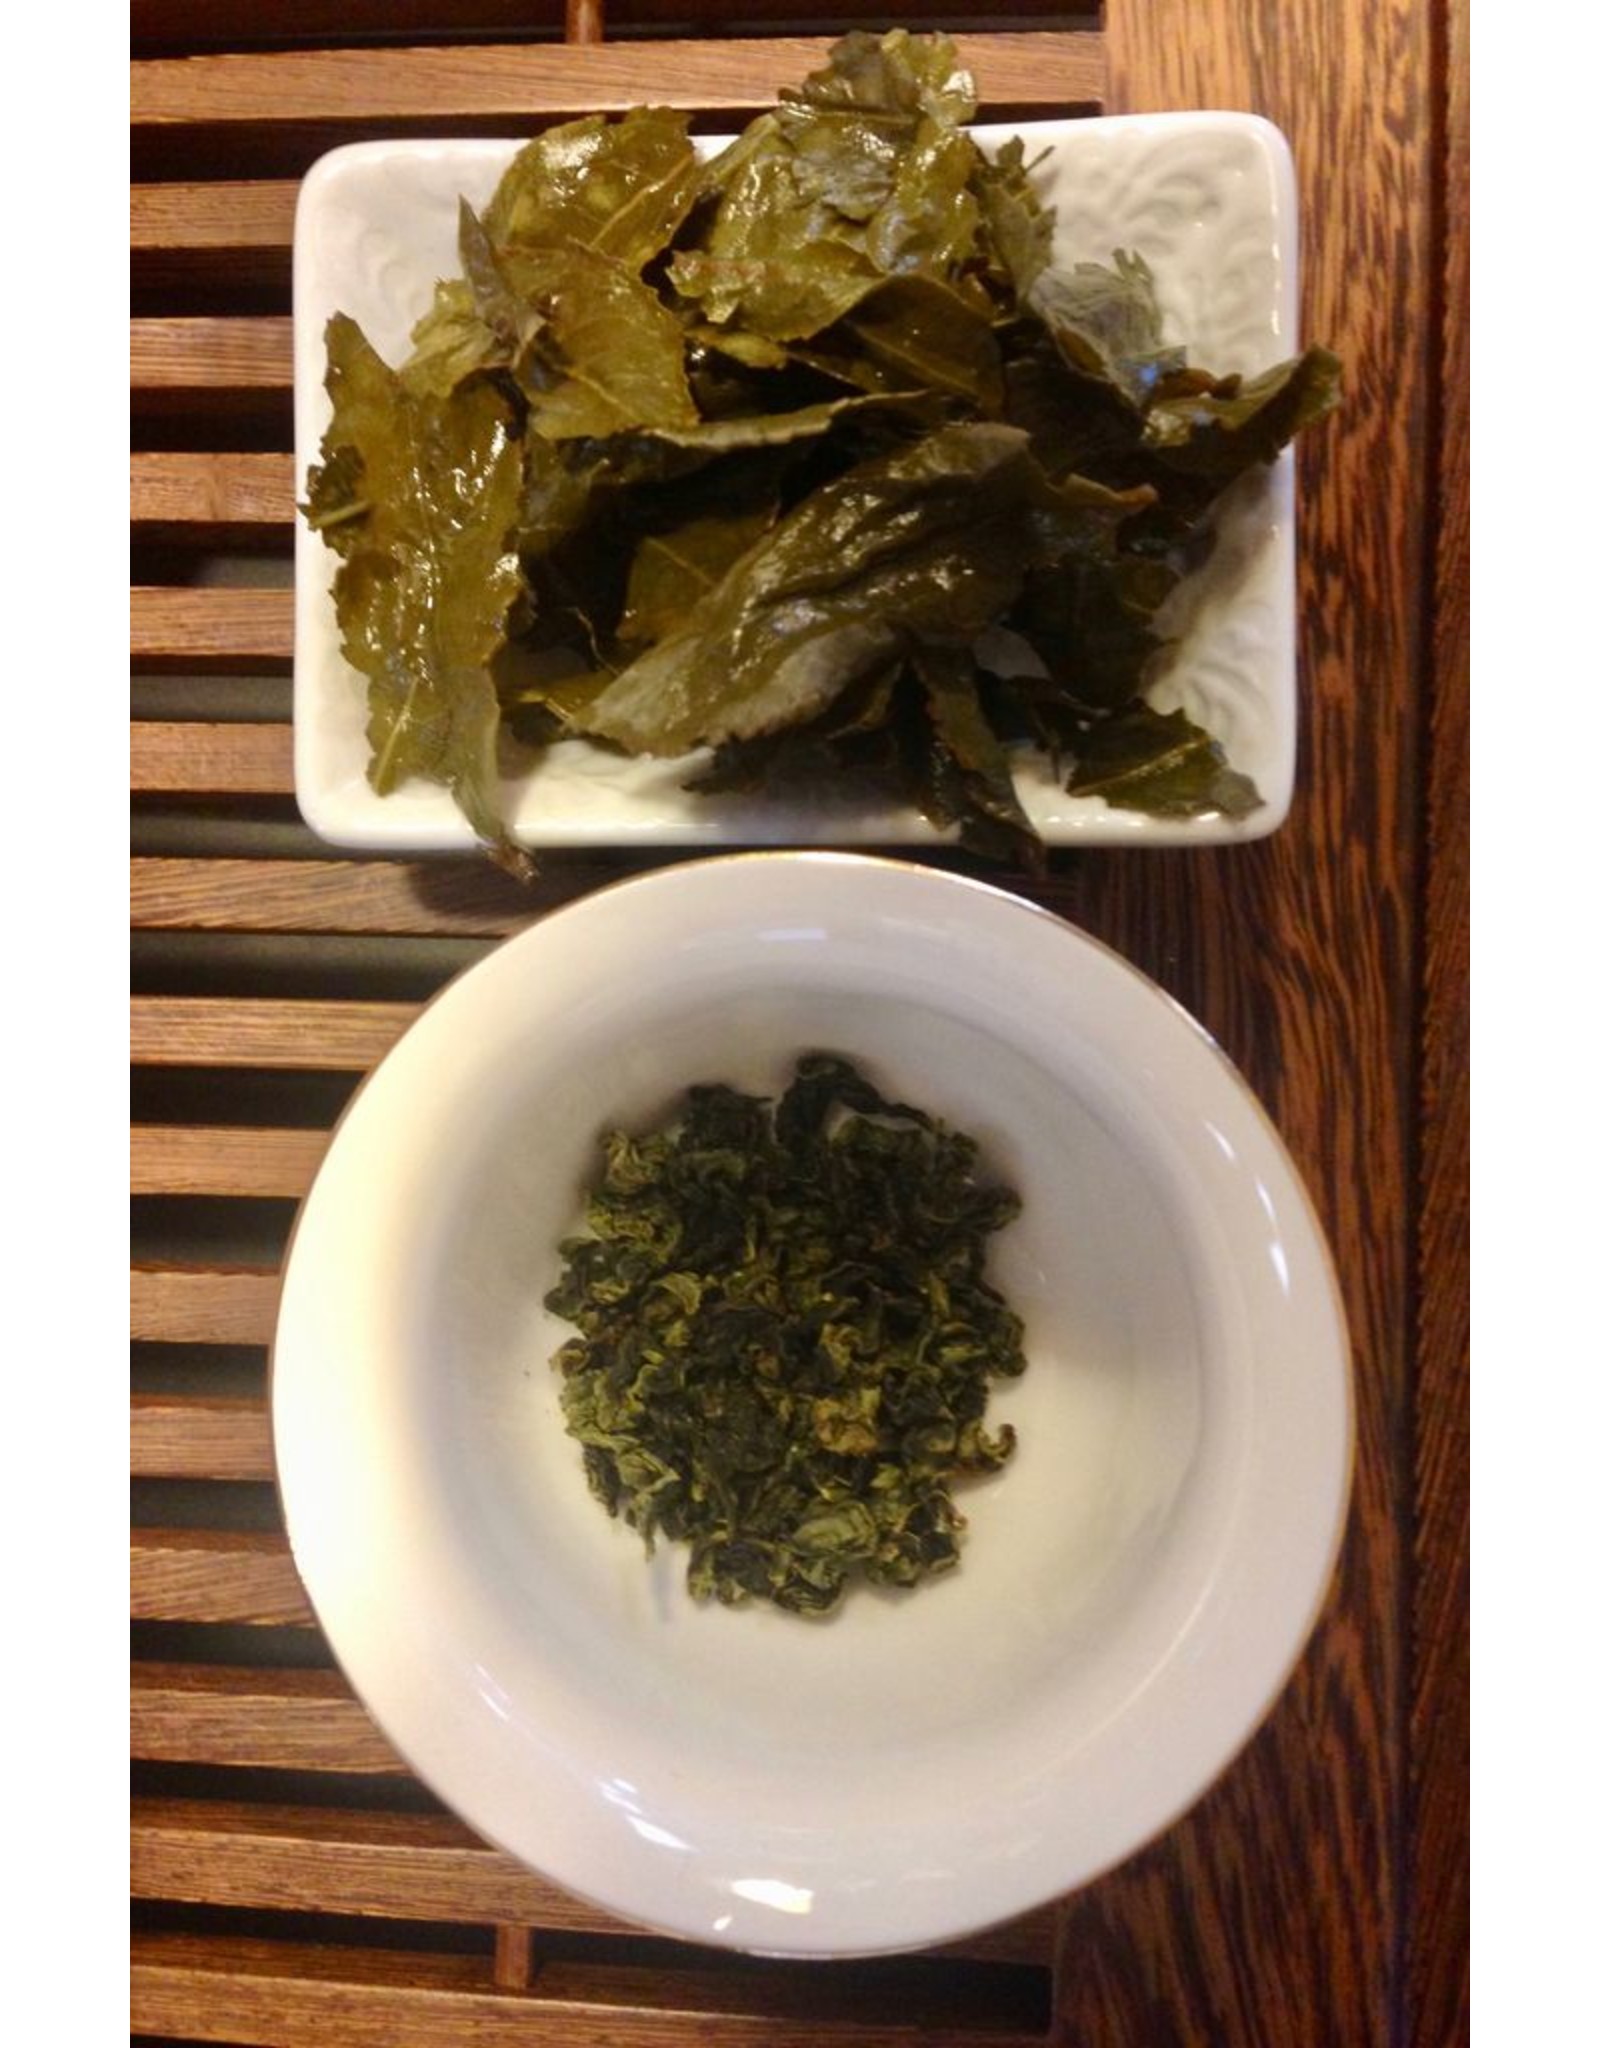 Off-Trail-Rare Tie Guan Yin, Anxi Watermelon Aroma (Off-Trail Oolong)